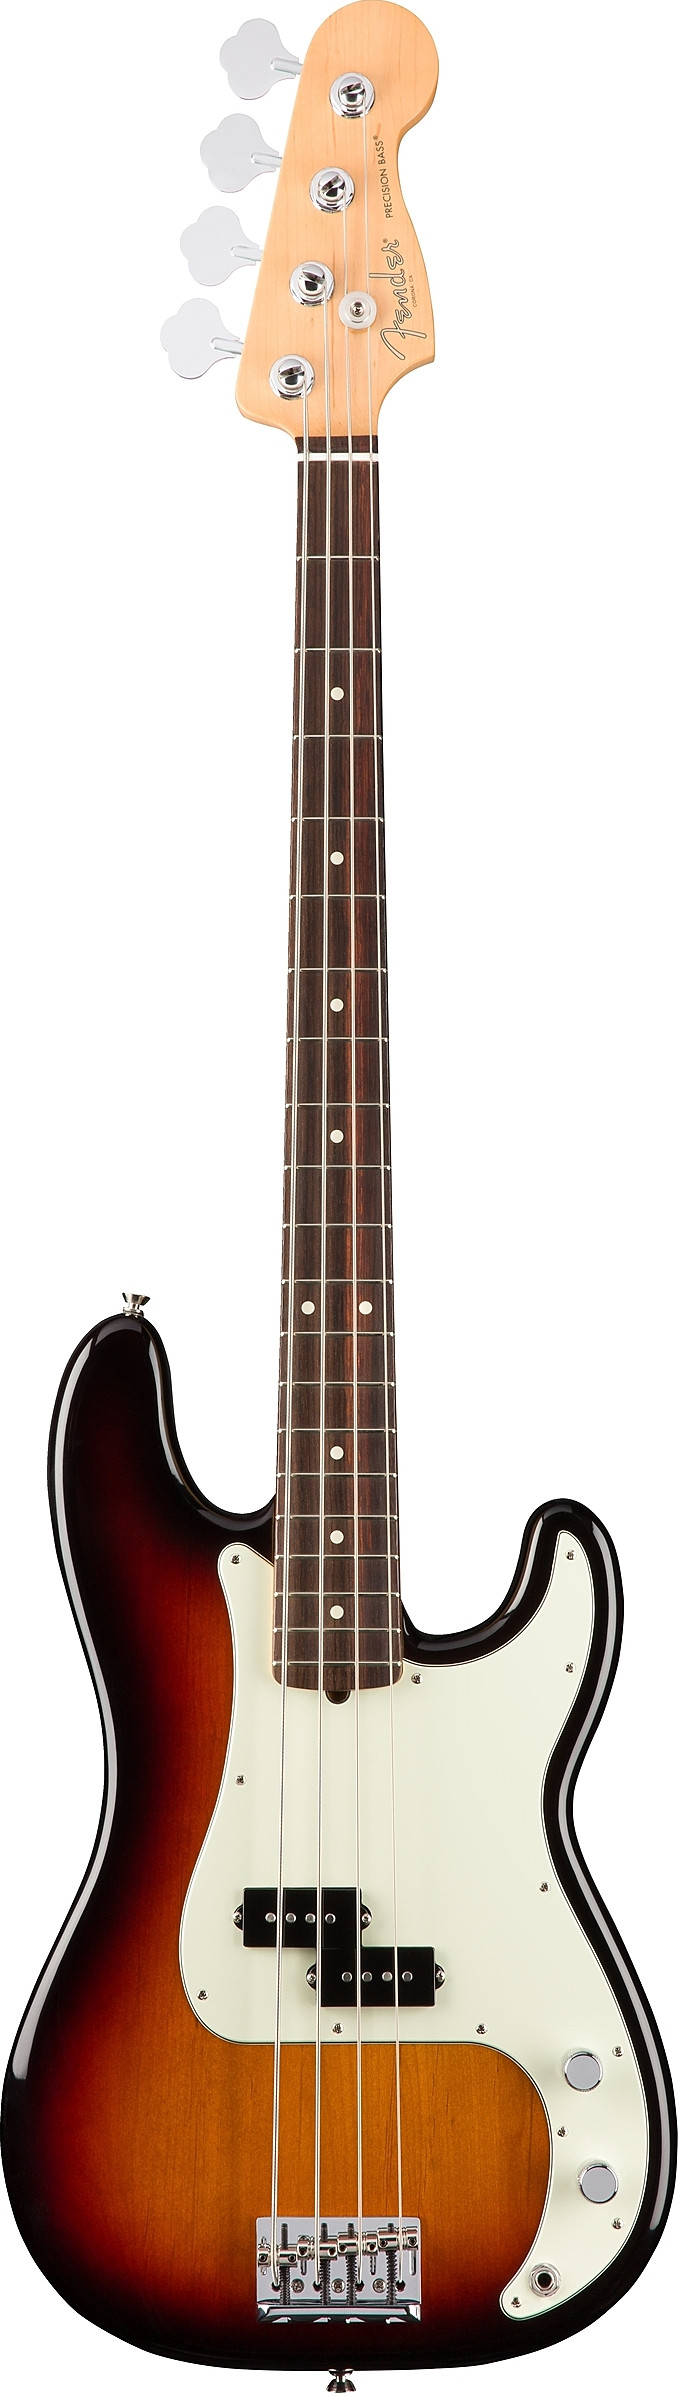 American Professional Precision Bass by Fender